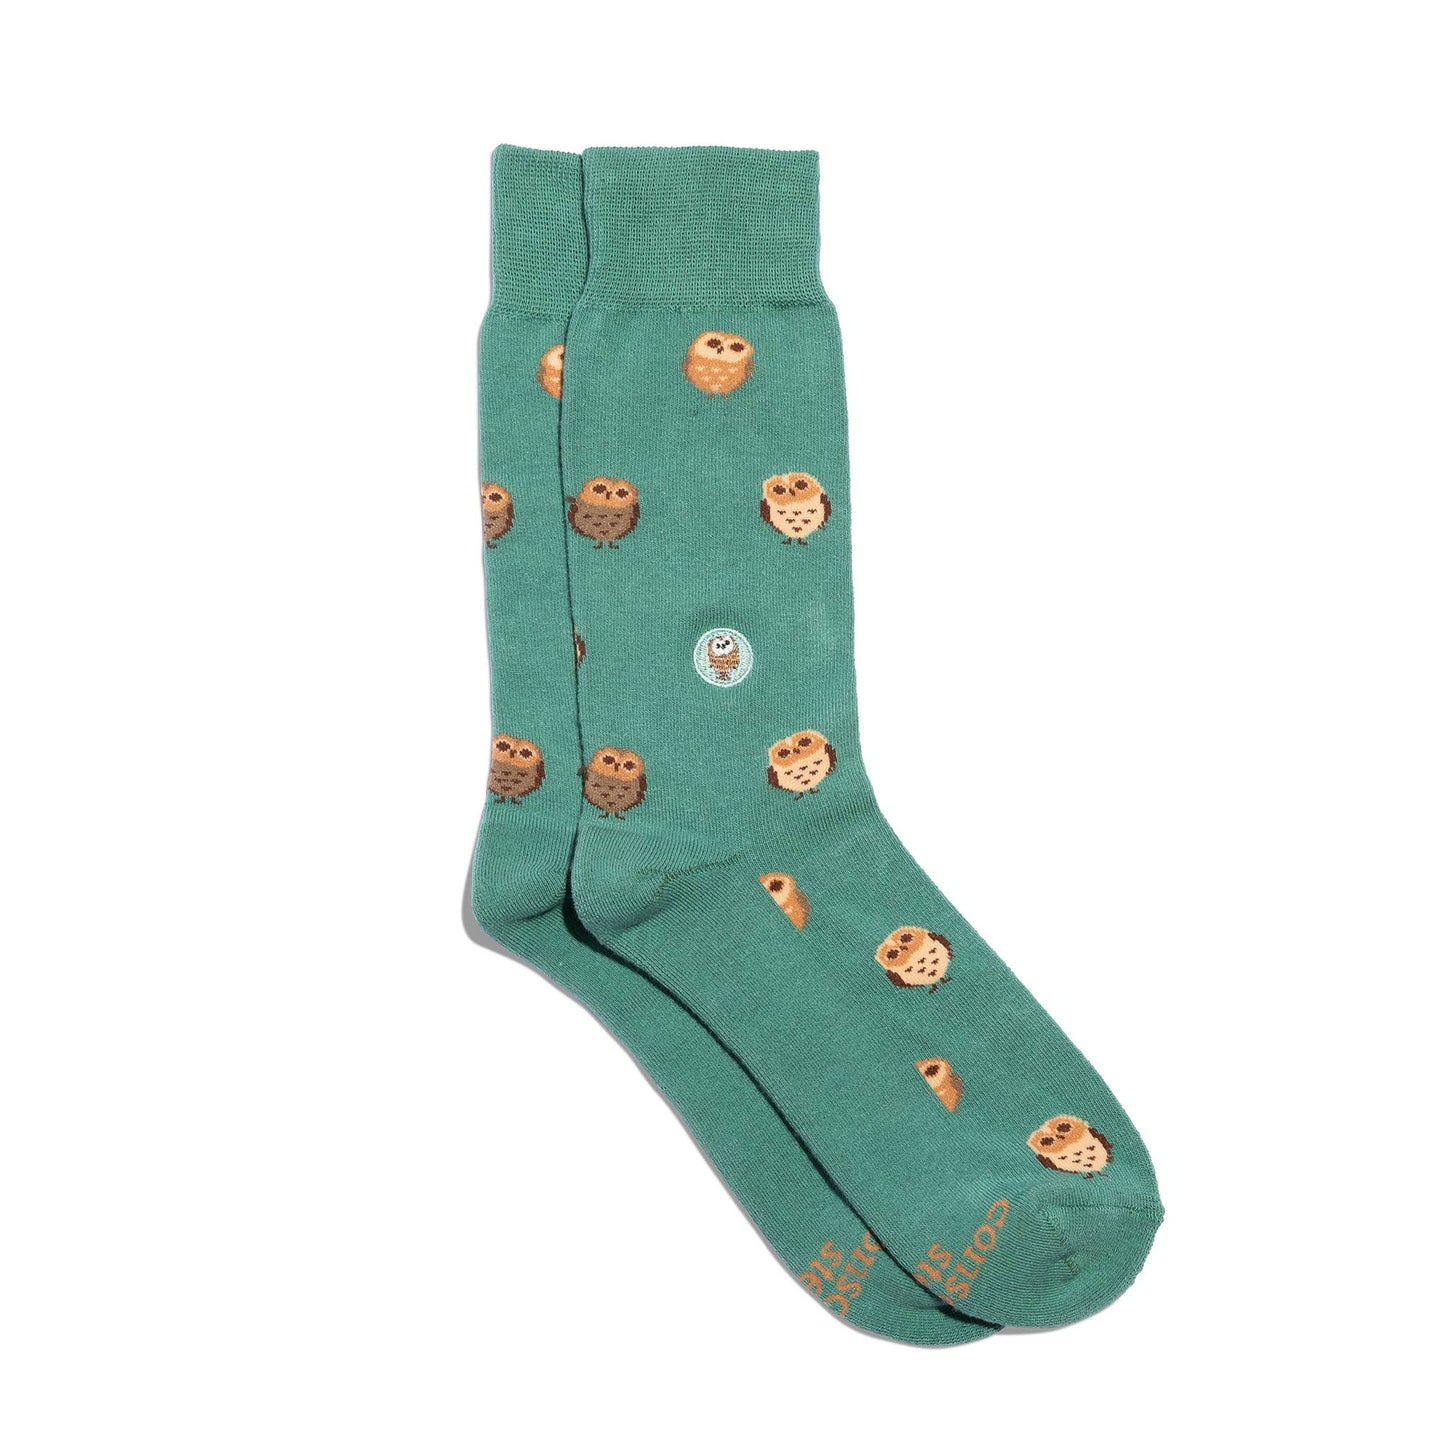 Conscious Step - Socks that Protect Owls: Small